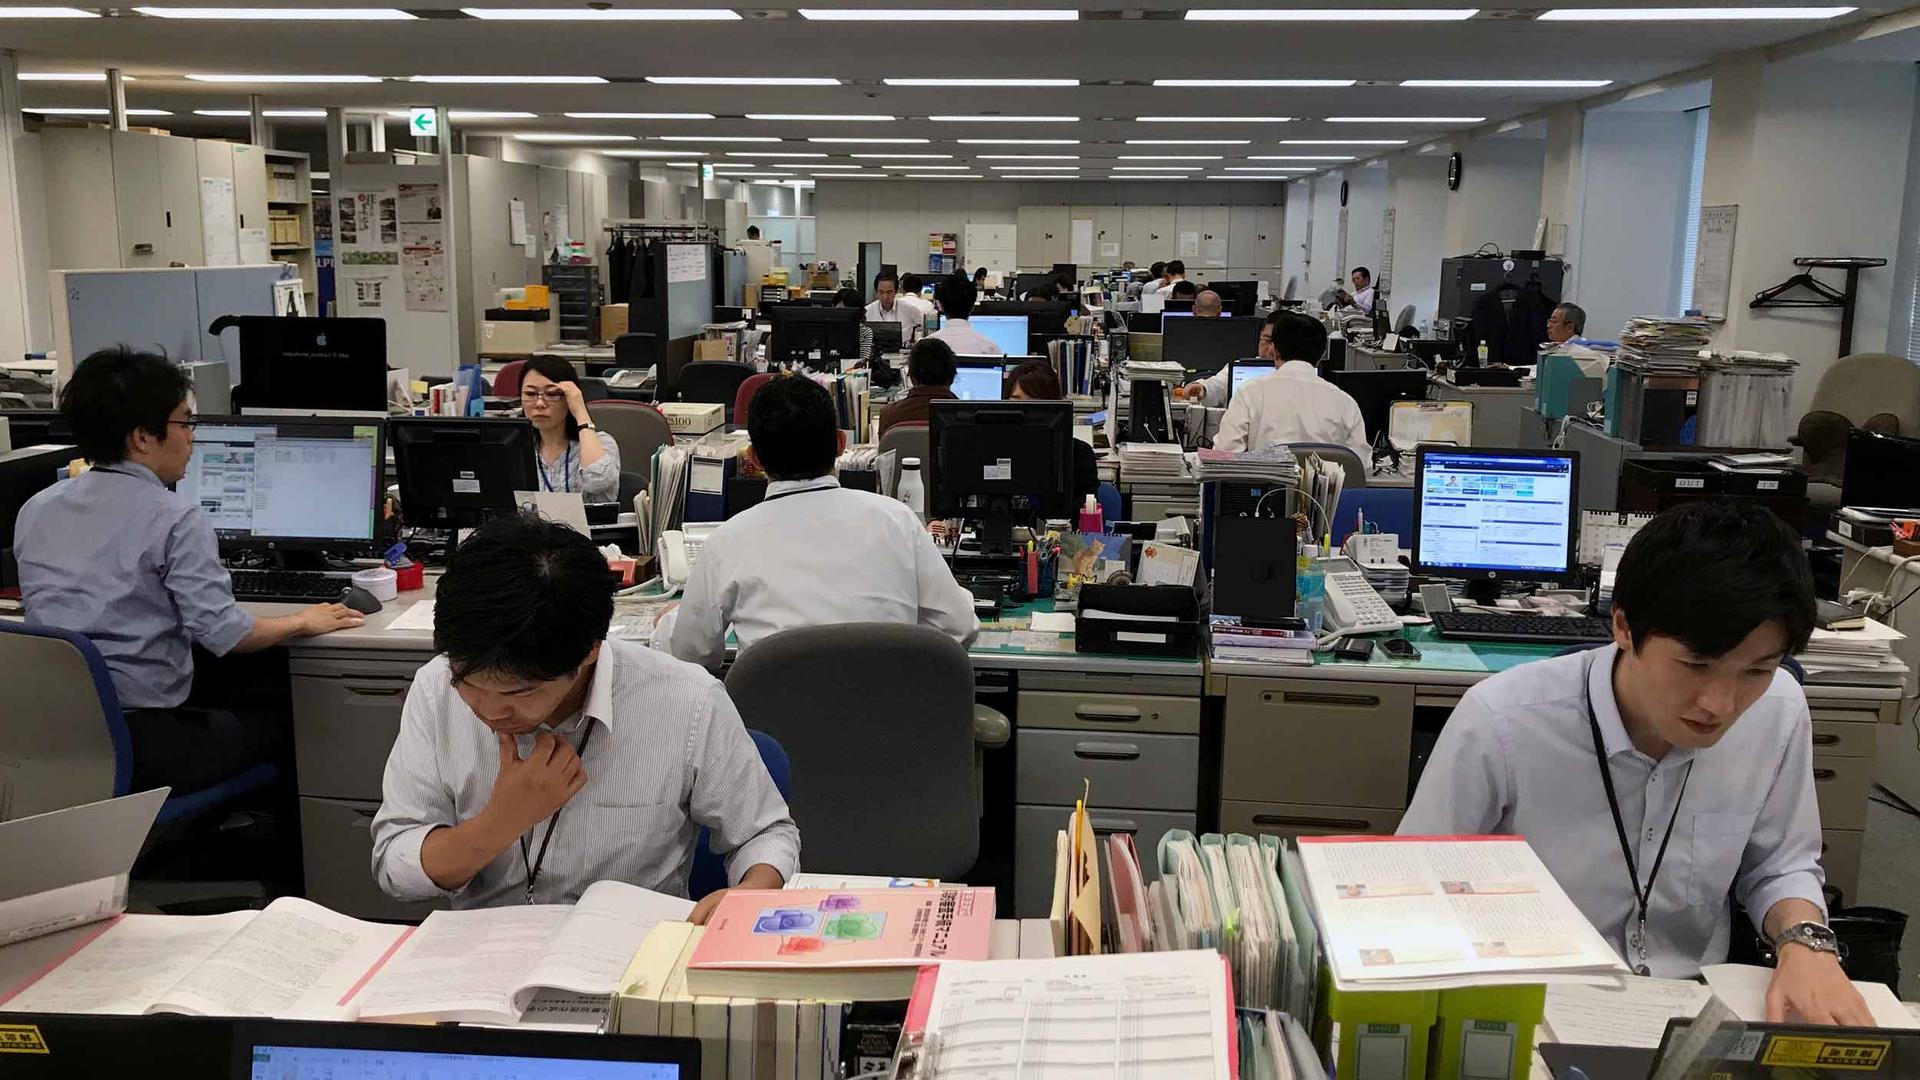 People are working at computers in a large open office